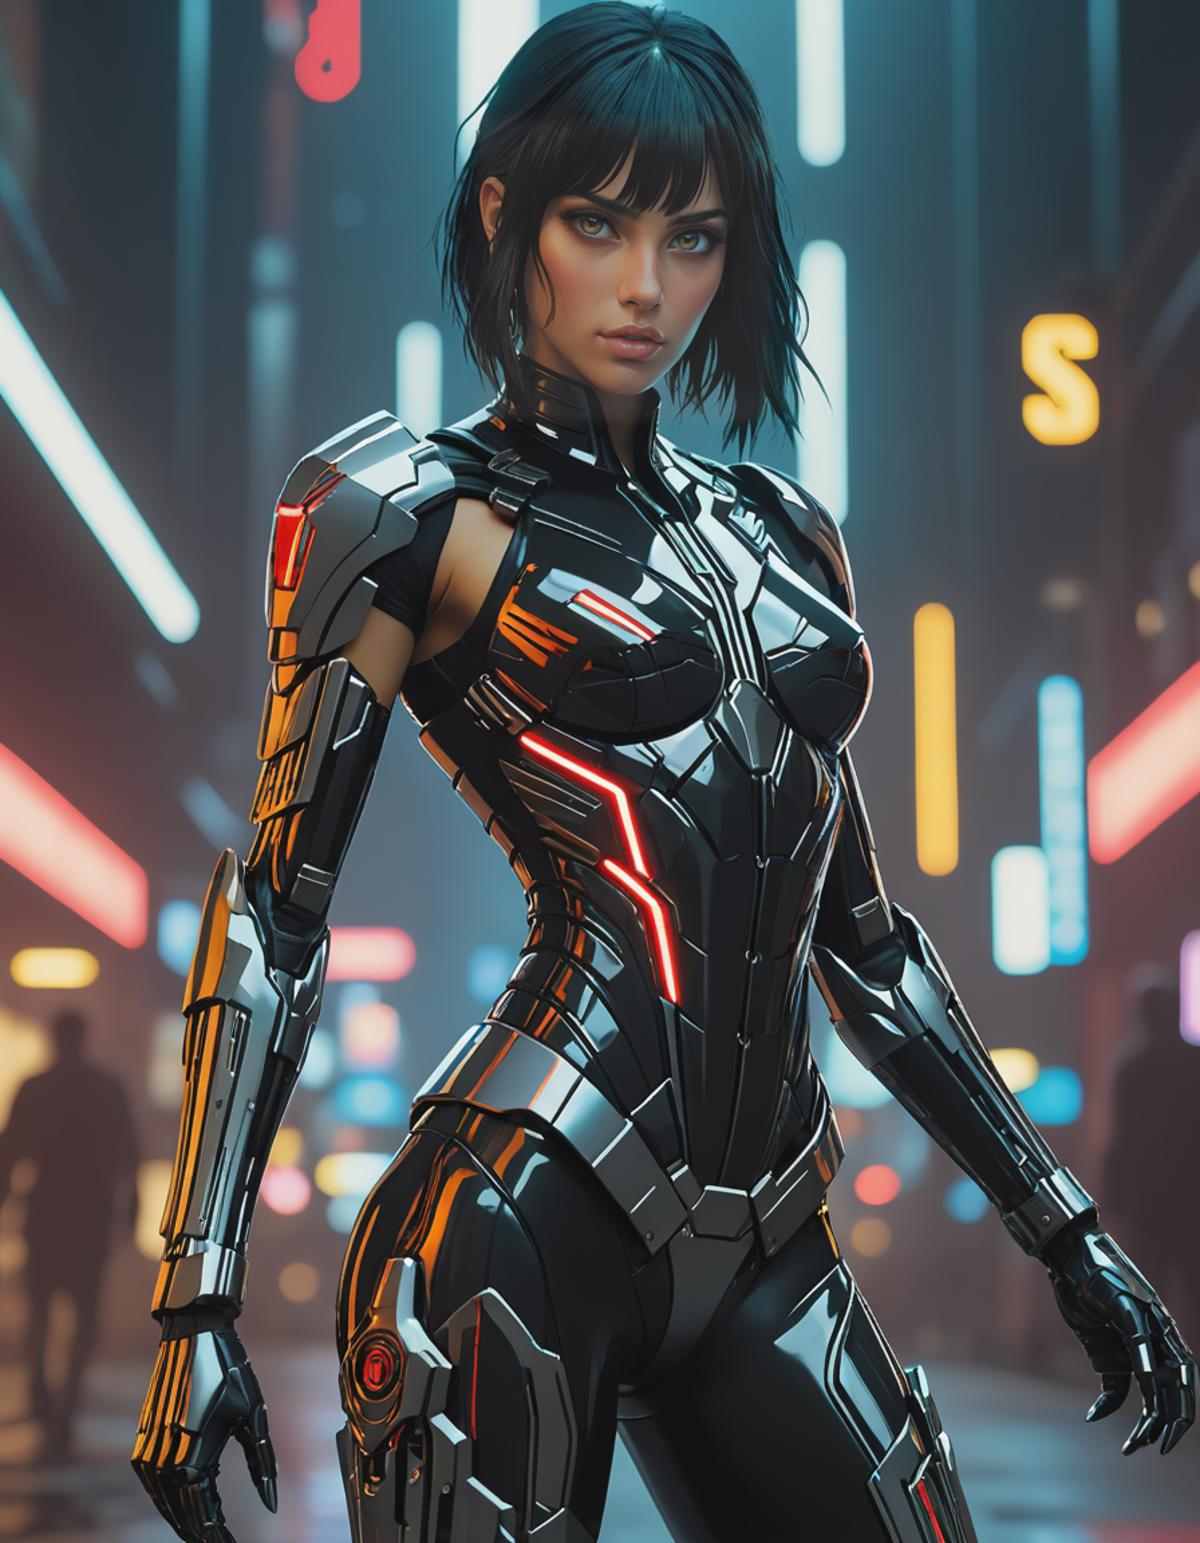 A woman in a futuristic, black and silver suit stands in a neon-lit room.